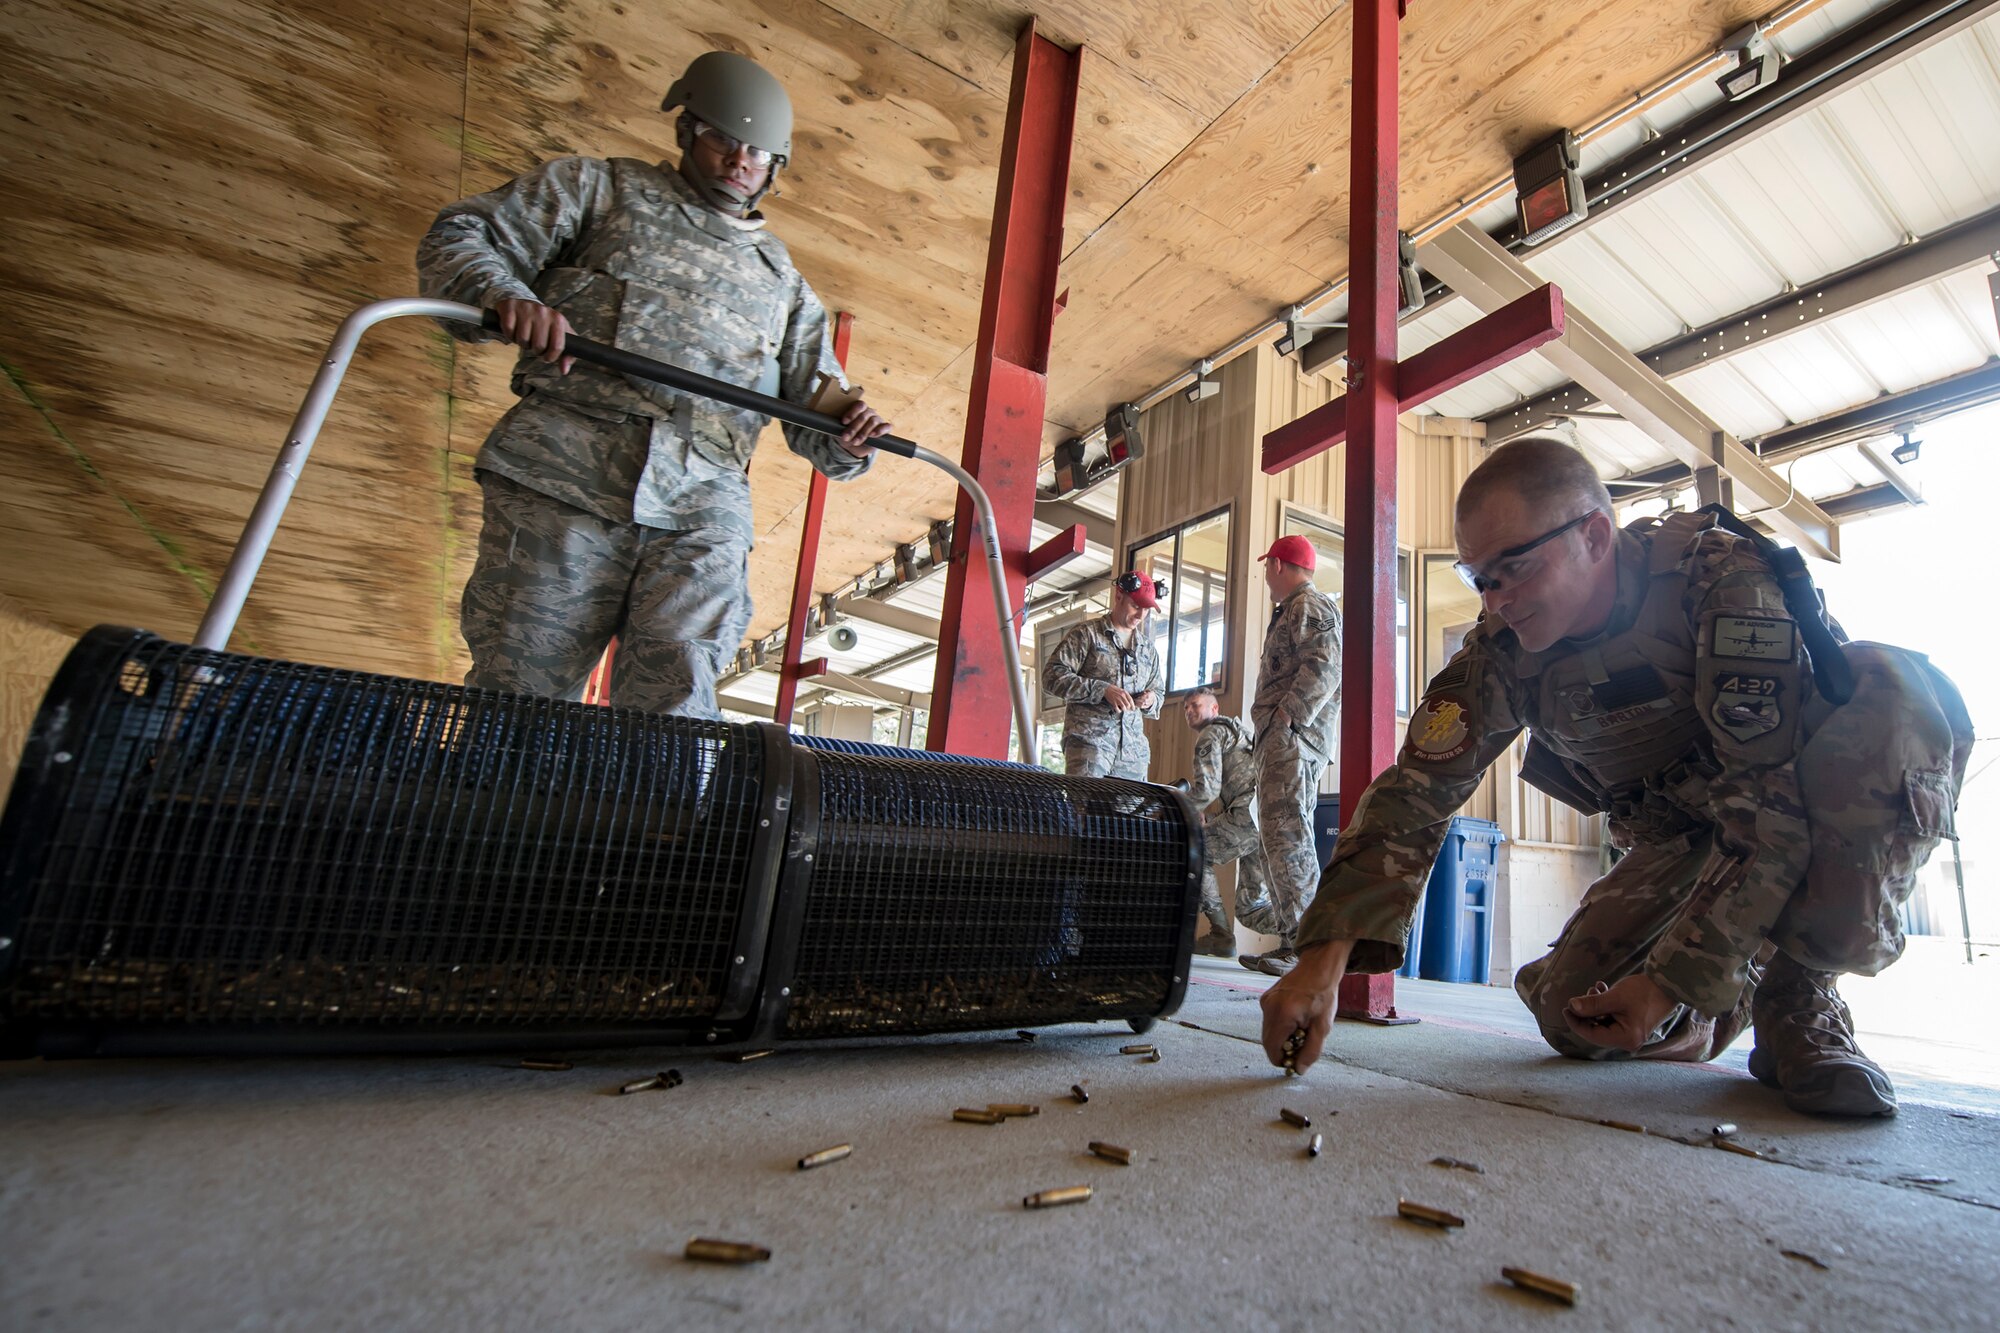 Tech. Sgt. Jonathon Tyler, left, 23d Maintenance Group munitions specialist, collects bullet casings with a brass roller following a Combat Arms Training and Maintenance (CATM) class, April 3, 2018, at Moody Air Force Base, Ga. Airmen must demonstrate quality safety standards while handling and shooting their weapons proficiently in order to be eligible to deploy. Throughout the class the instructors emphasized: weapon handling techniques, proper sight usage and internal weapon cleaning procedures.   (U.S. Air Force photo by Airman Eugene Oliver)